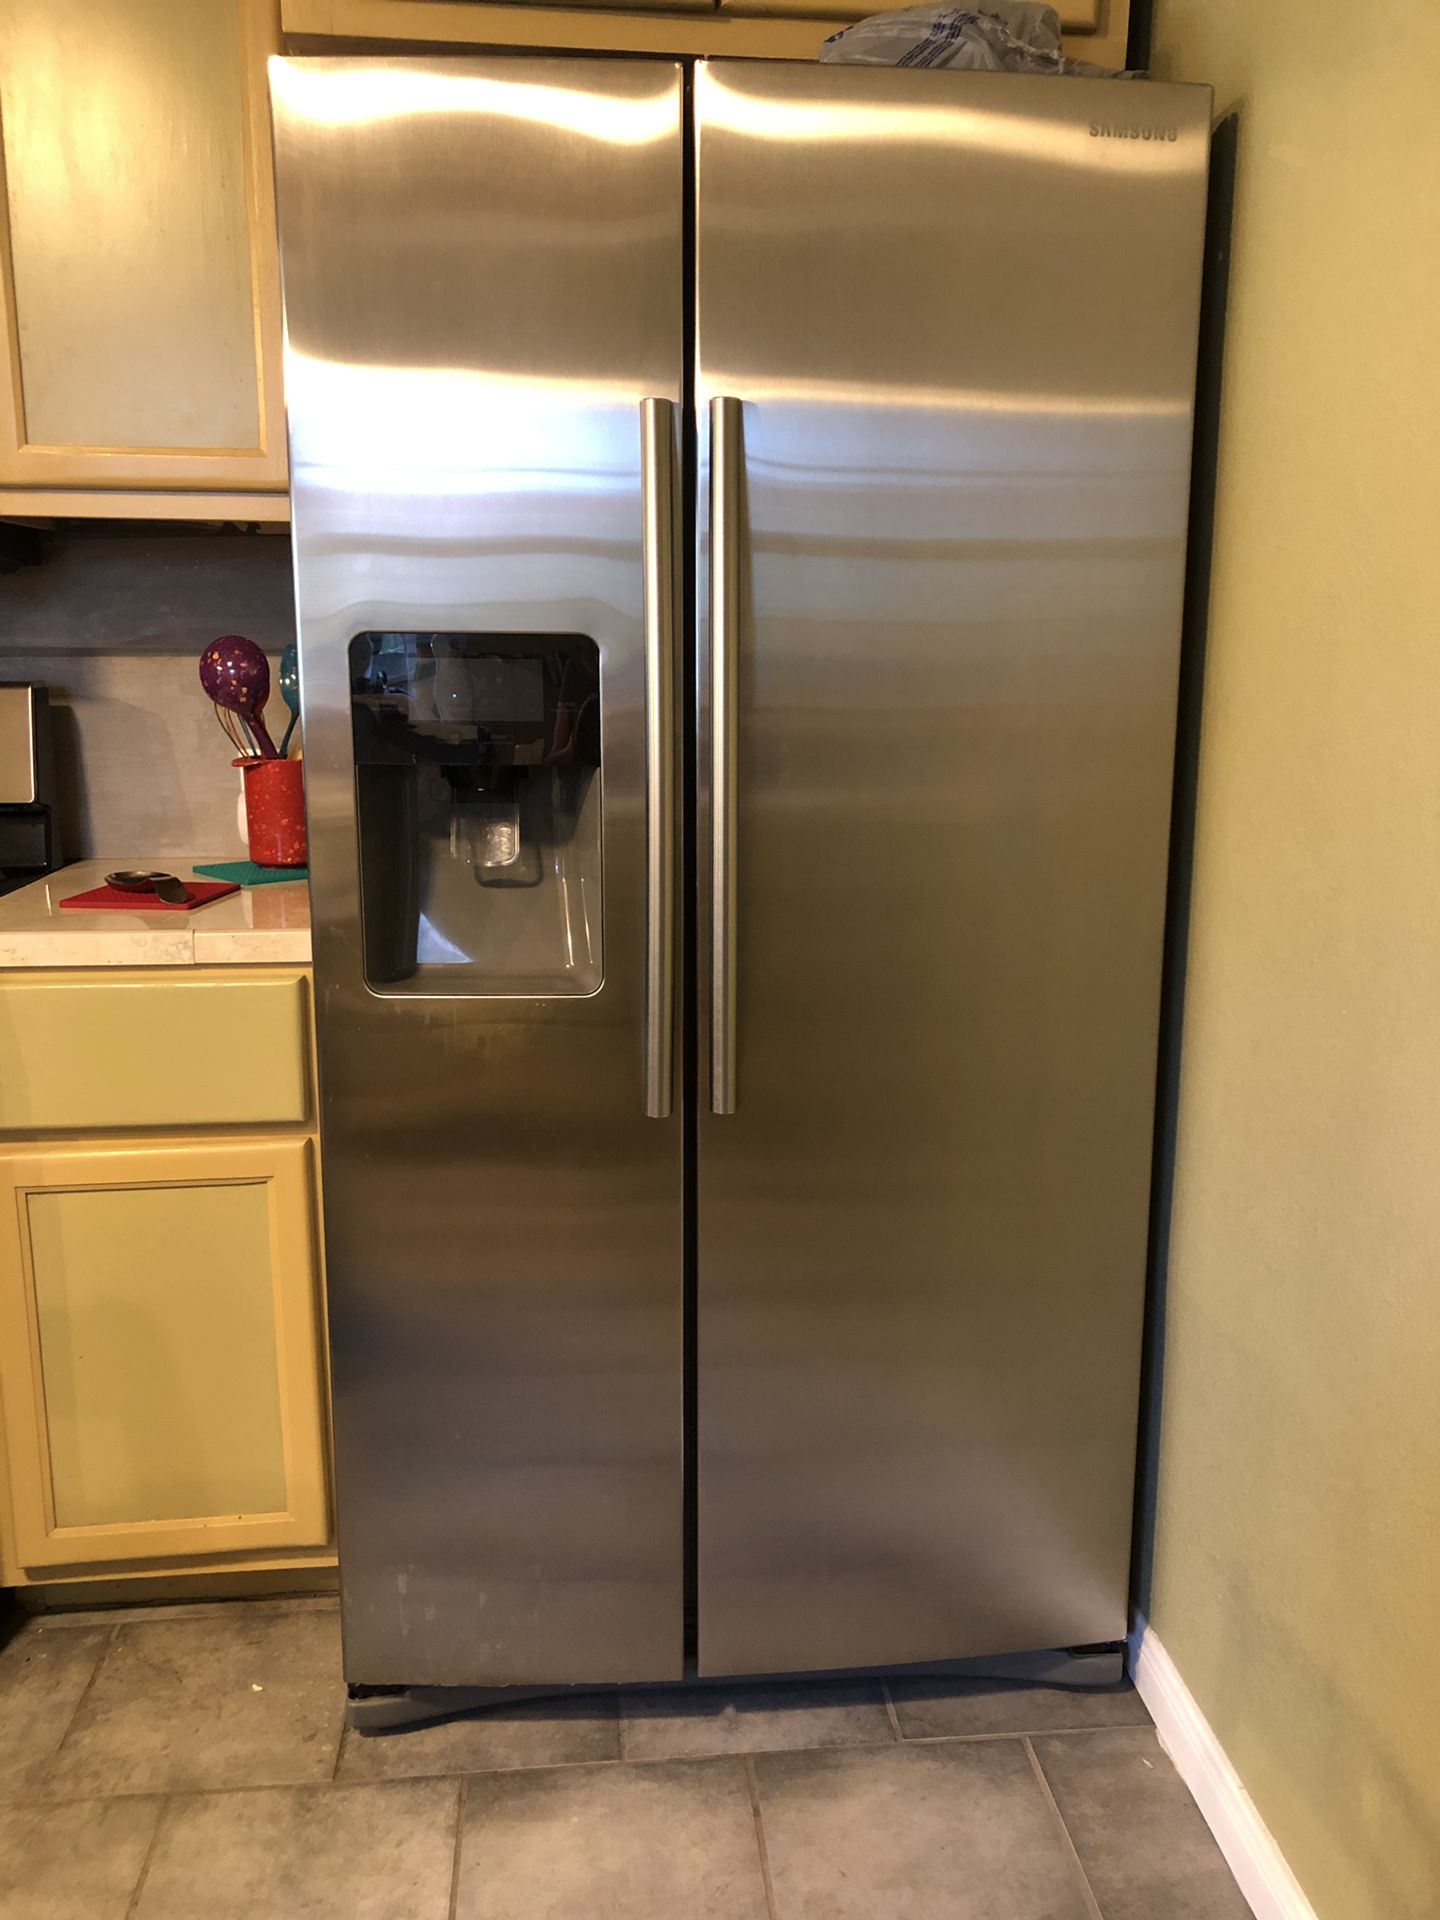 KITCHEN APPLIANCES MOVING SELL